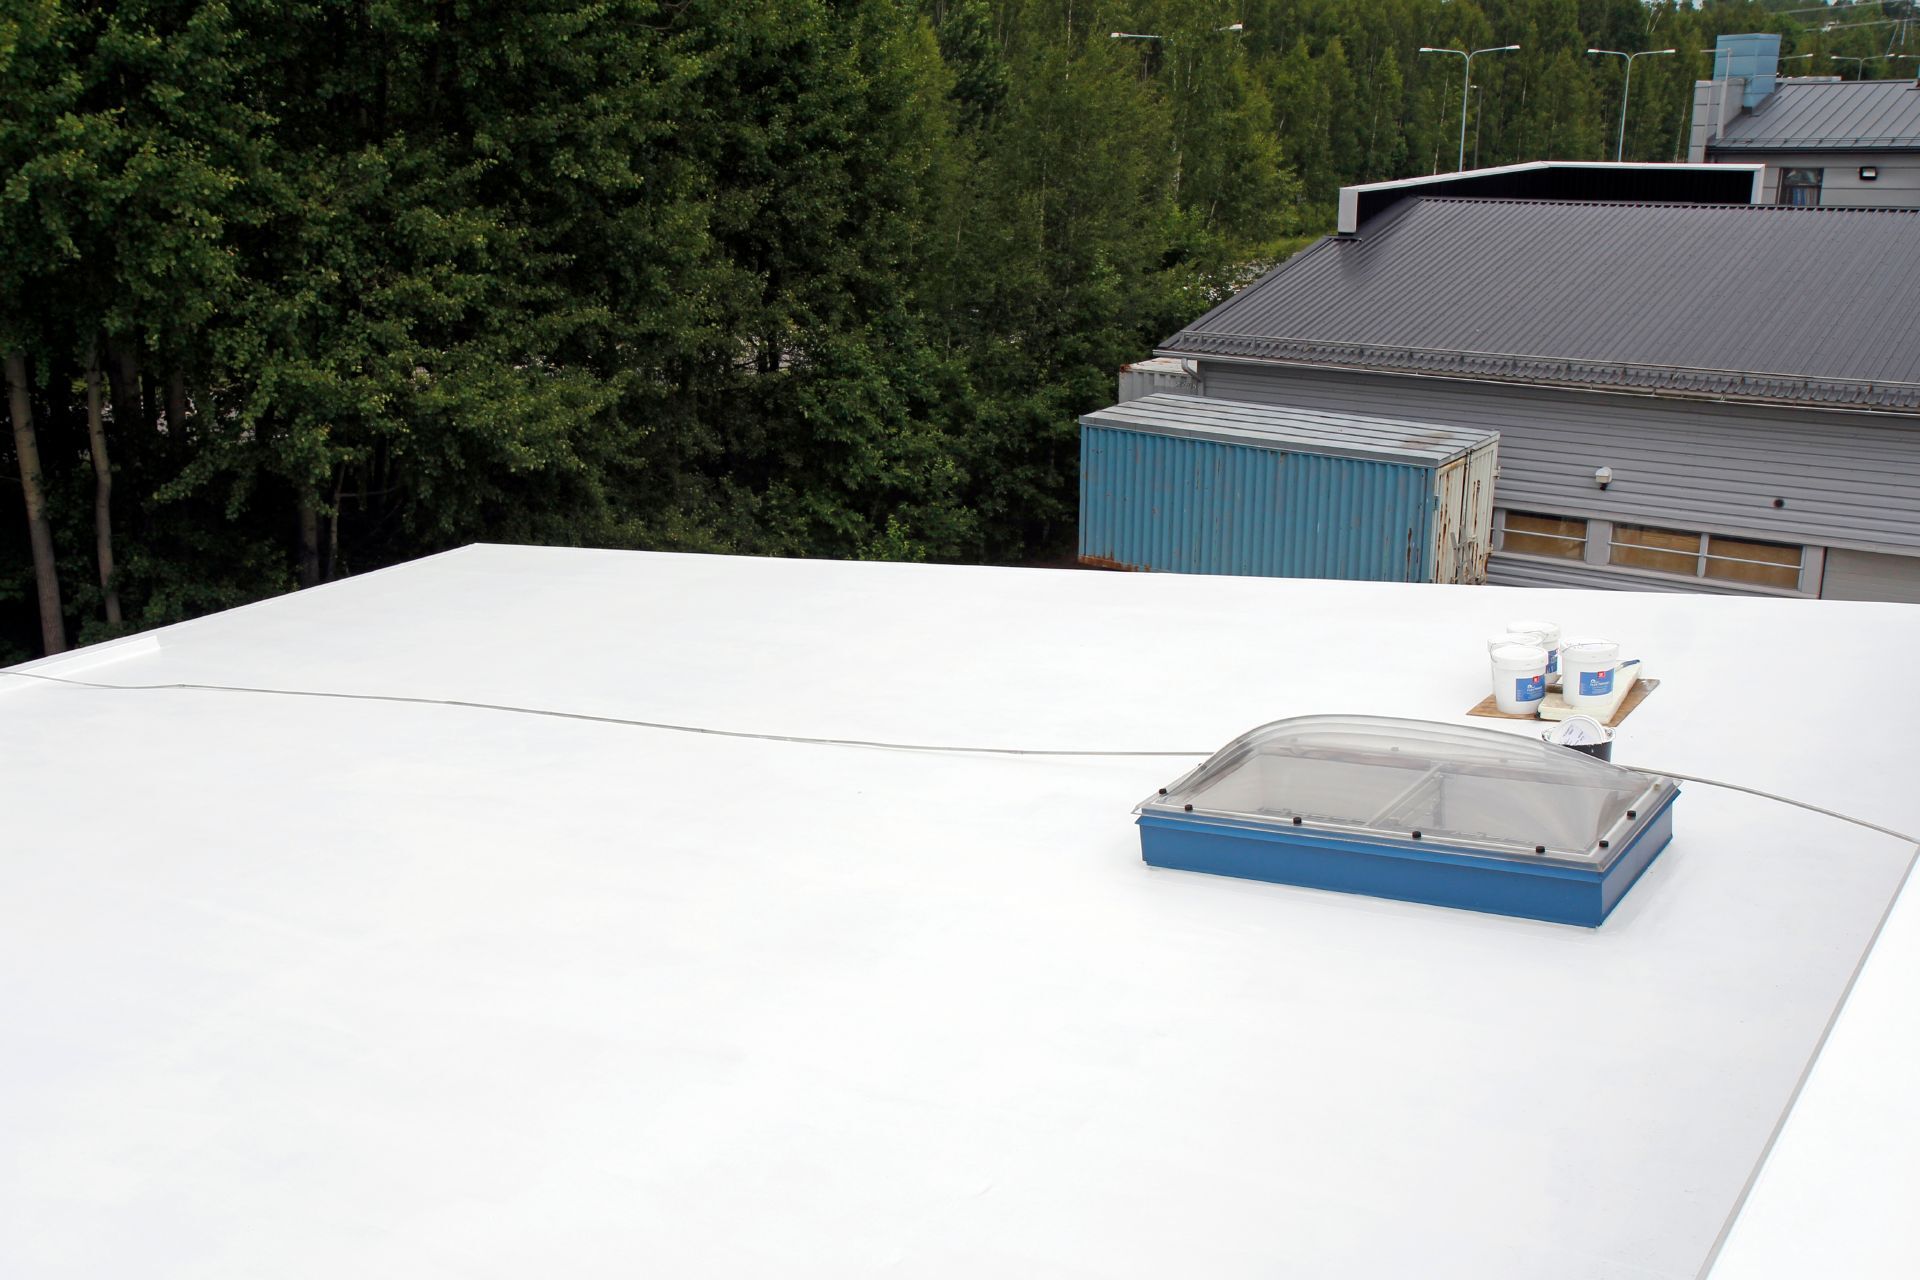 Lower temperature on the roof surface